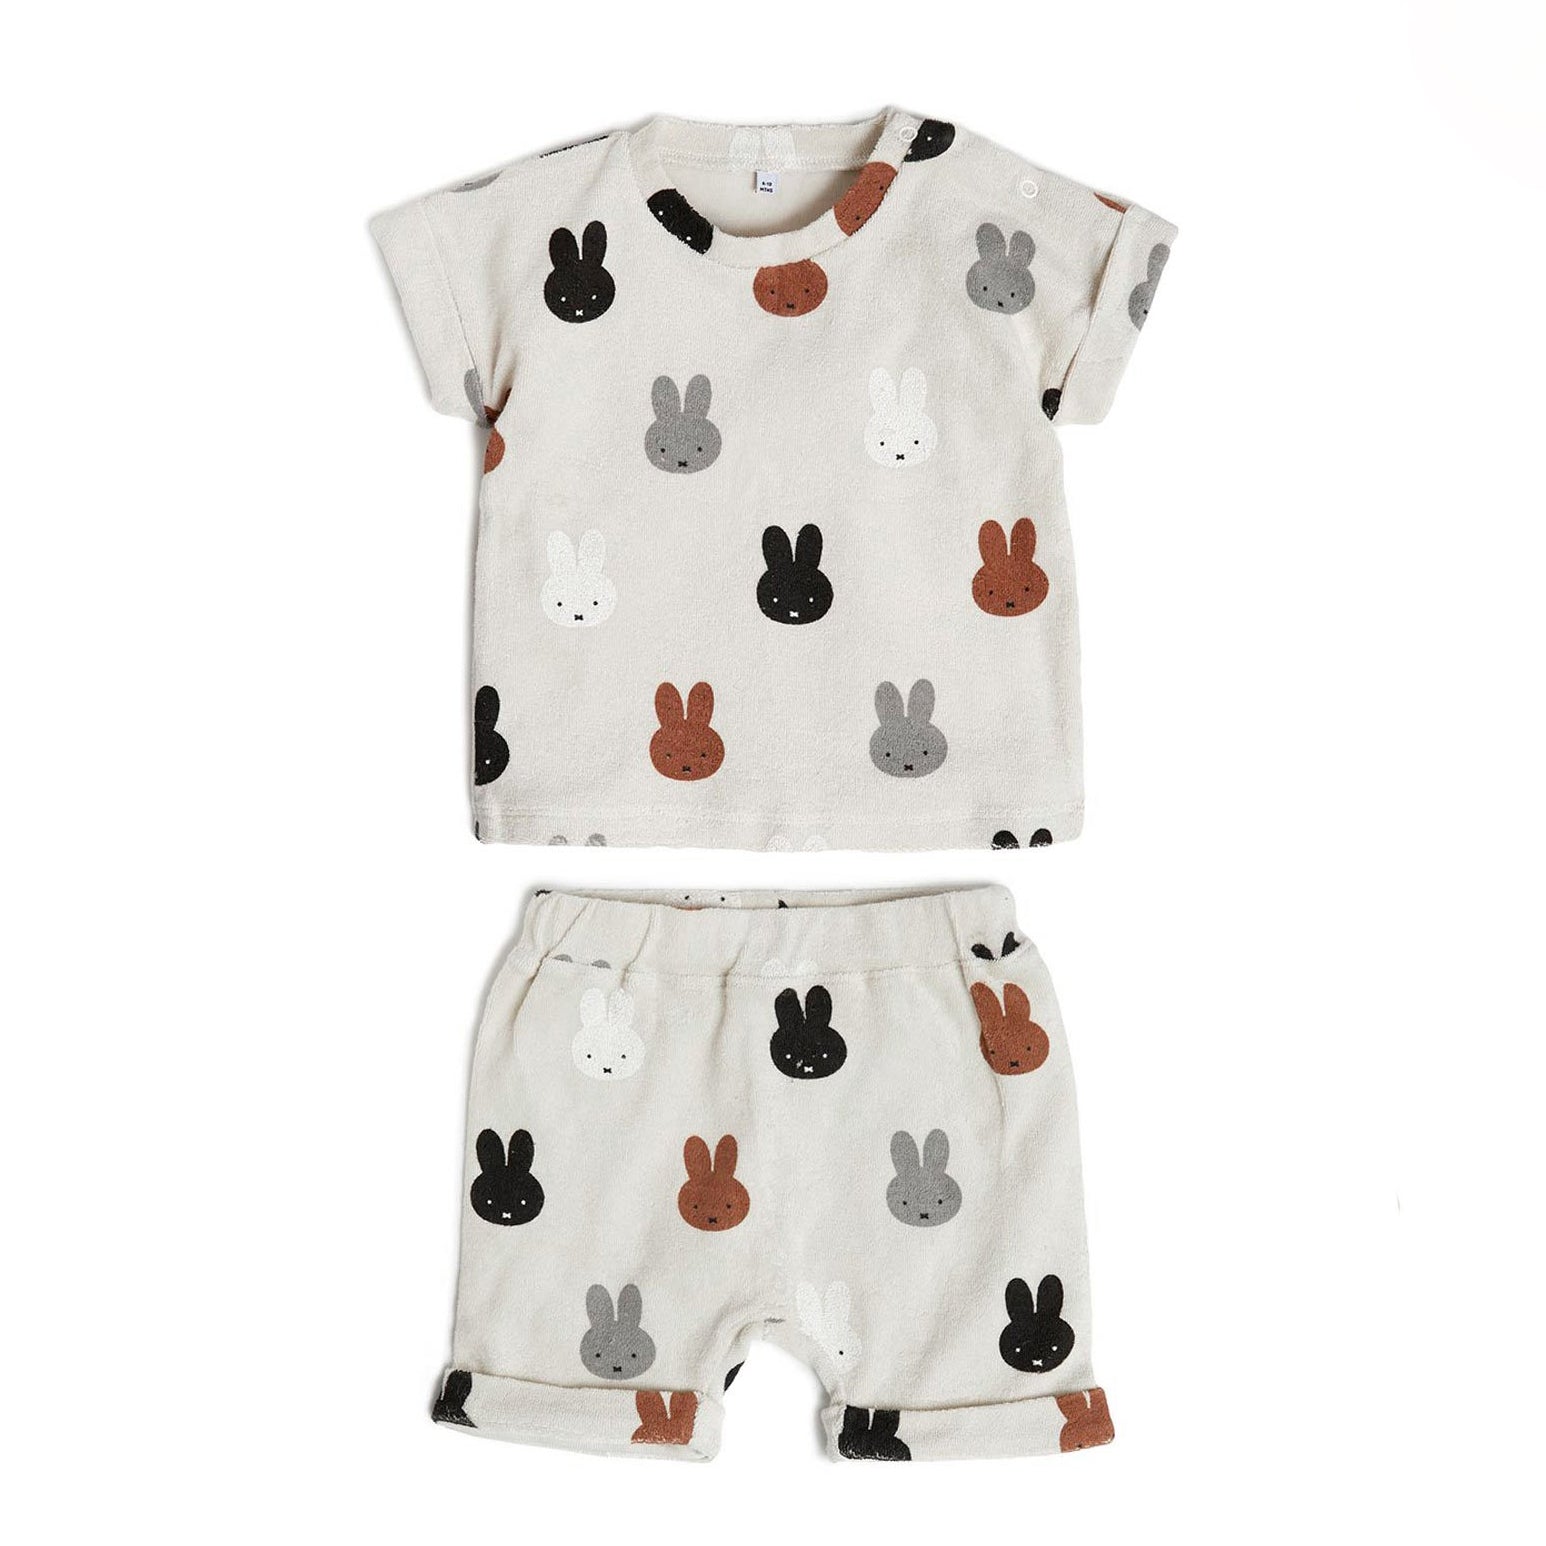 Miffy & Friends terry tee and shorts set (6m-4y) - AT NOON STORE